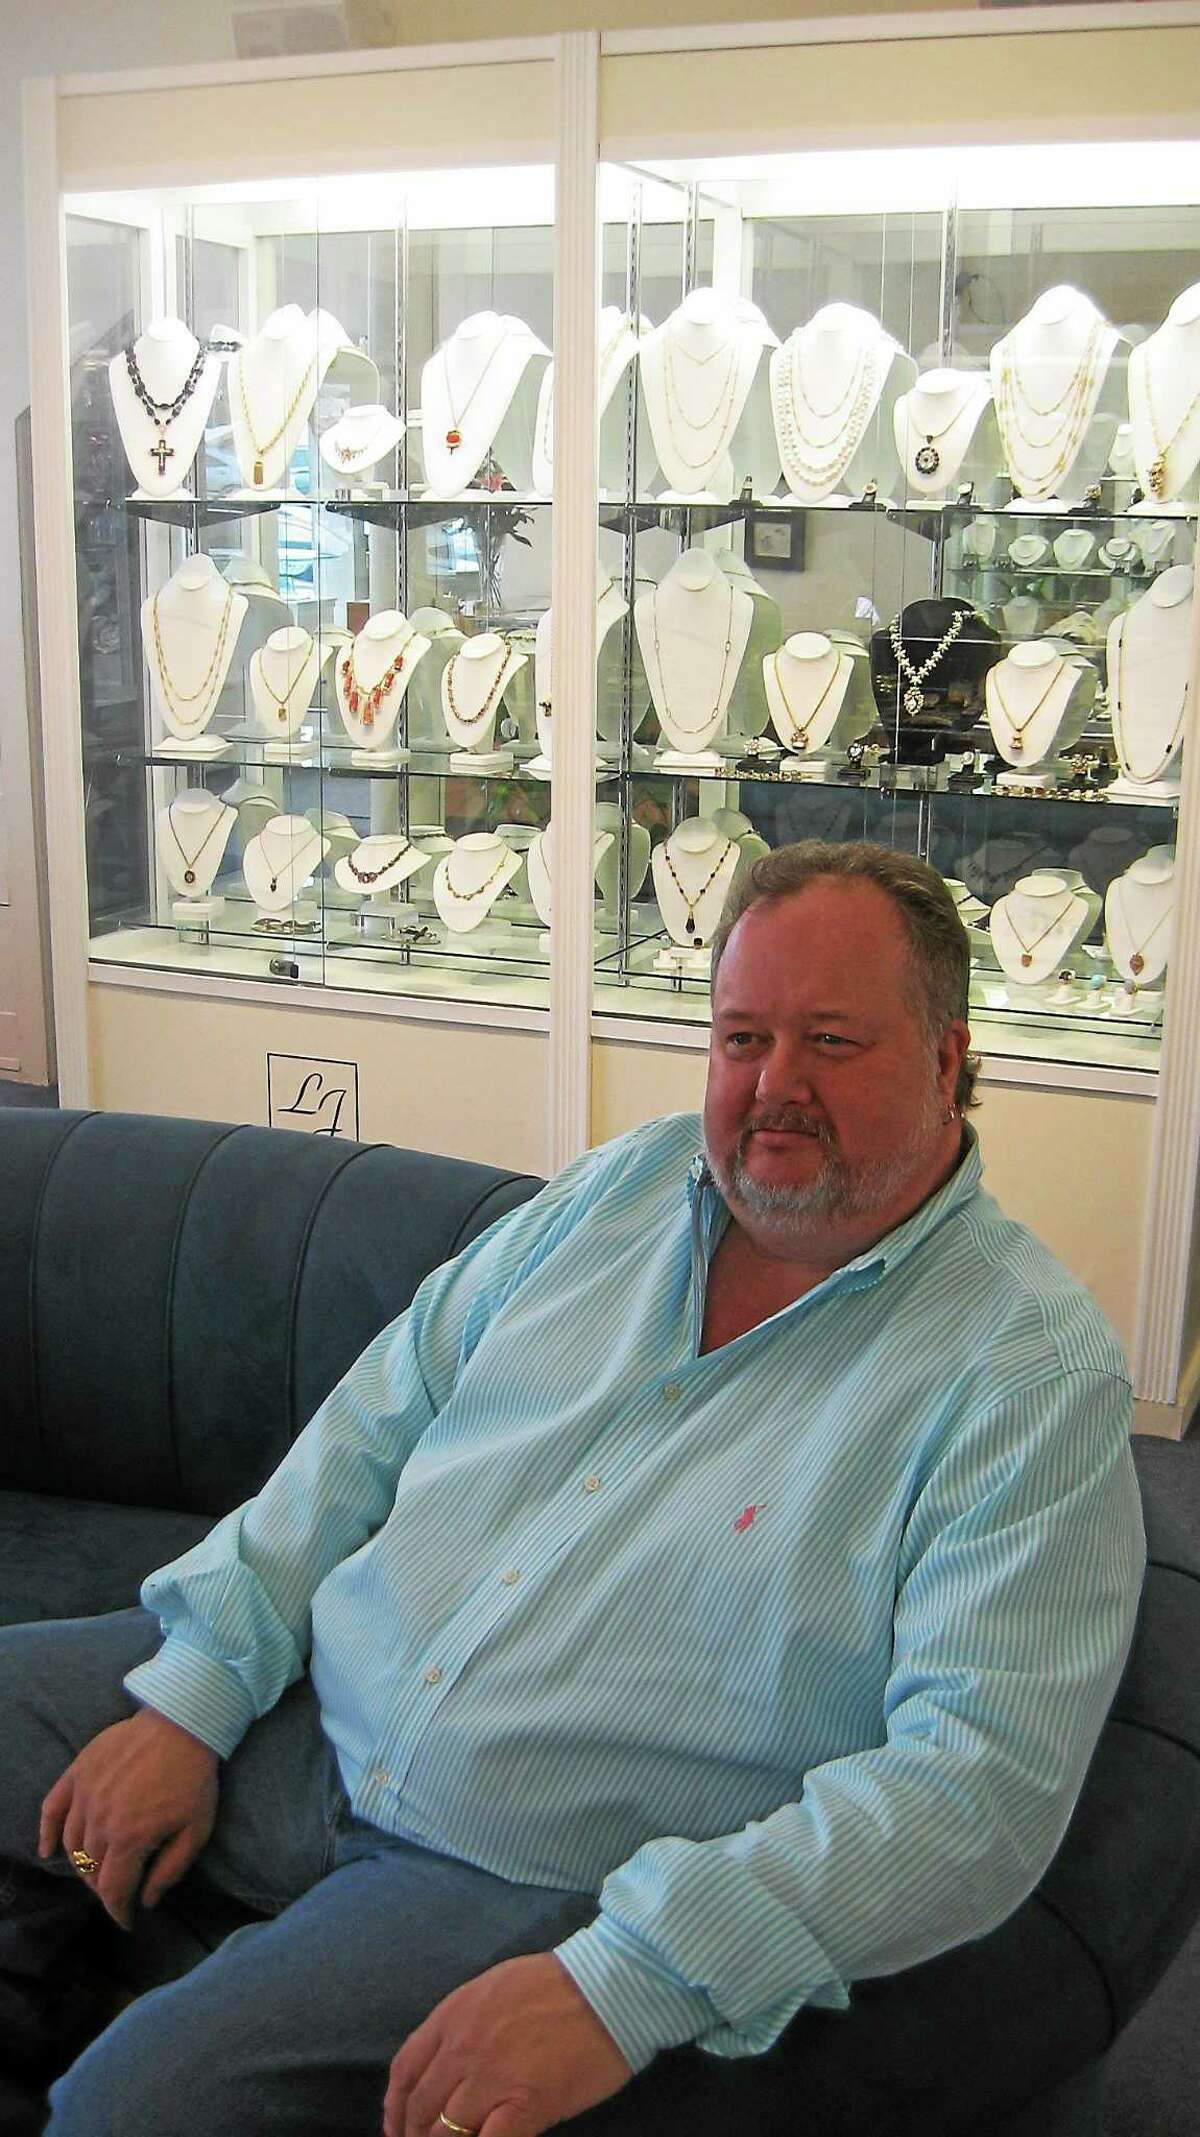 Jeffrey Russak named his store The Lawrence Jeffrey Estate Jewelry shop in honor of his father.